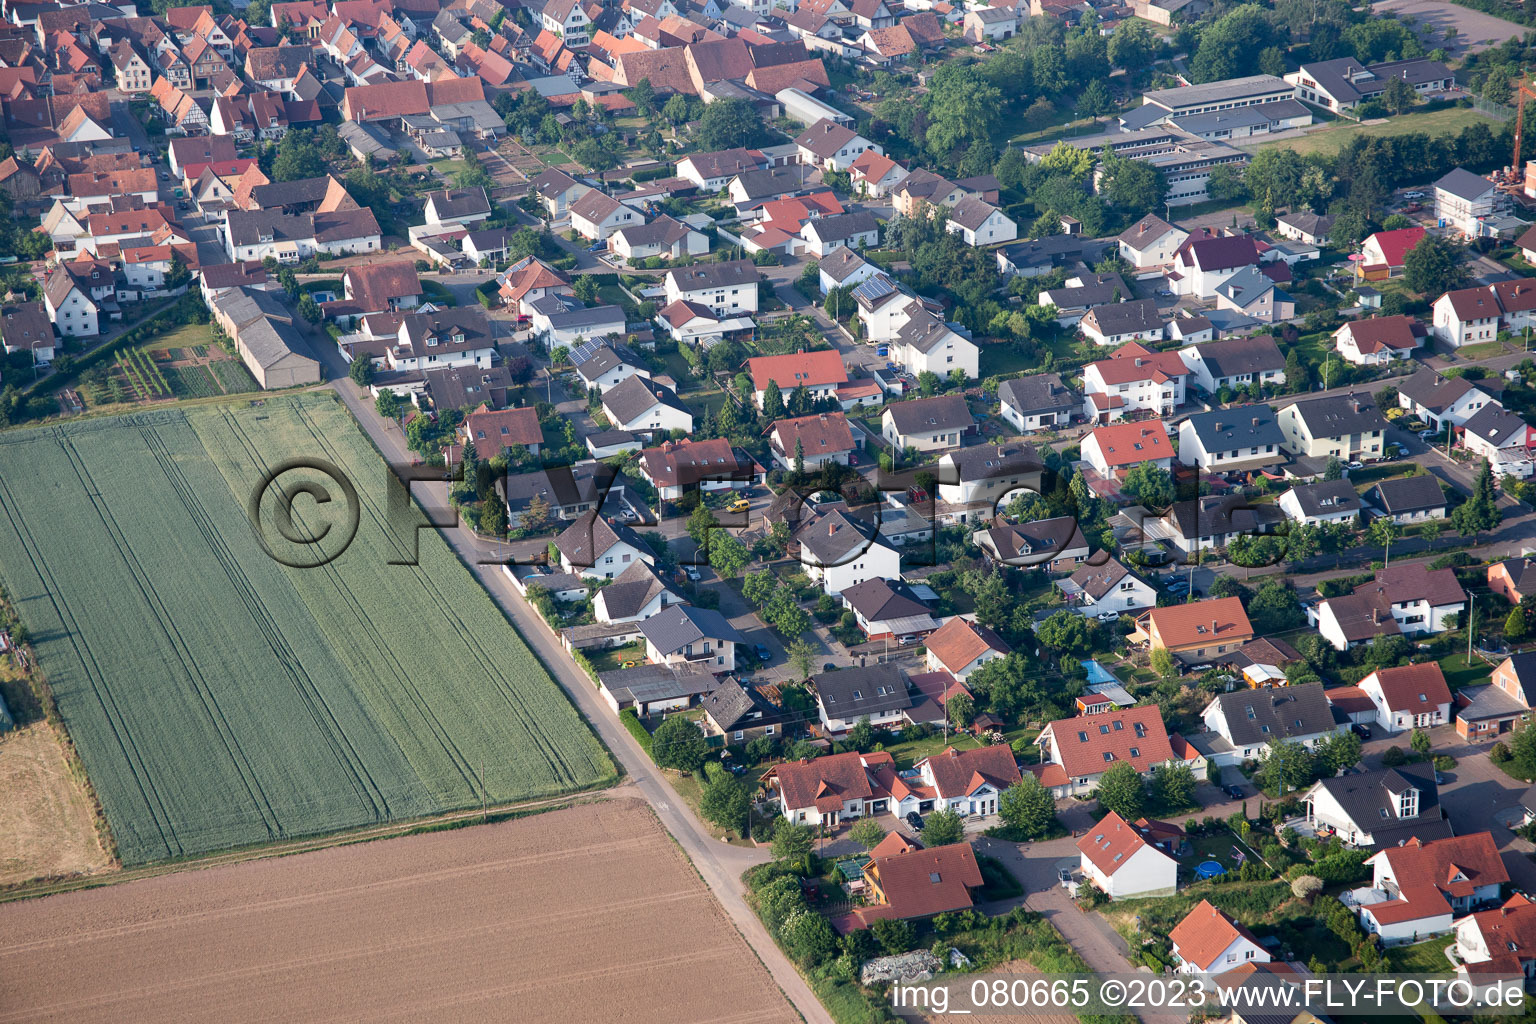 Ottersheim bei Landau in the state Rhineland-Palatinate, Germany out of the air